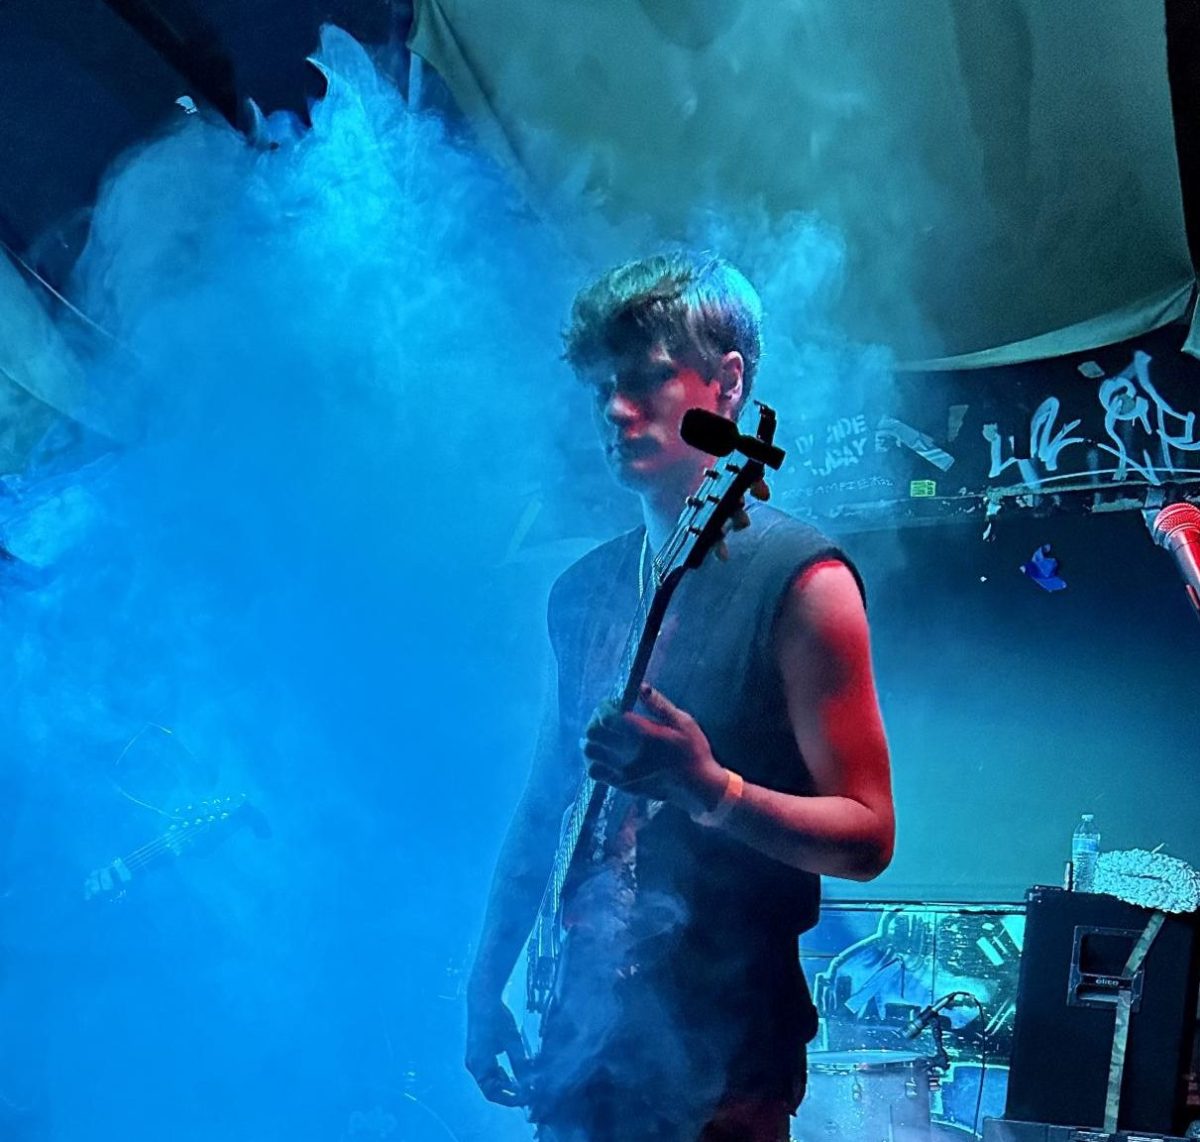 Dominik Dworak ‘24 plays his guitar near a fog machine at Seventh Circle Oct. 20. The name, Crypts of Golgotha, was created by their drummer, which they all agreed would be a good name for the band. “Our singer and guitarists name is Gabe, and I’ve known him since March of 2022. The drummer is his brother, Joaquin, and I’ve known him since last summer,” Dworak said.